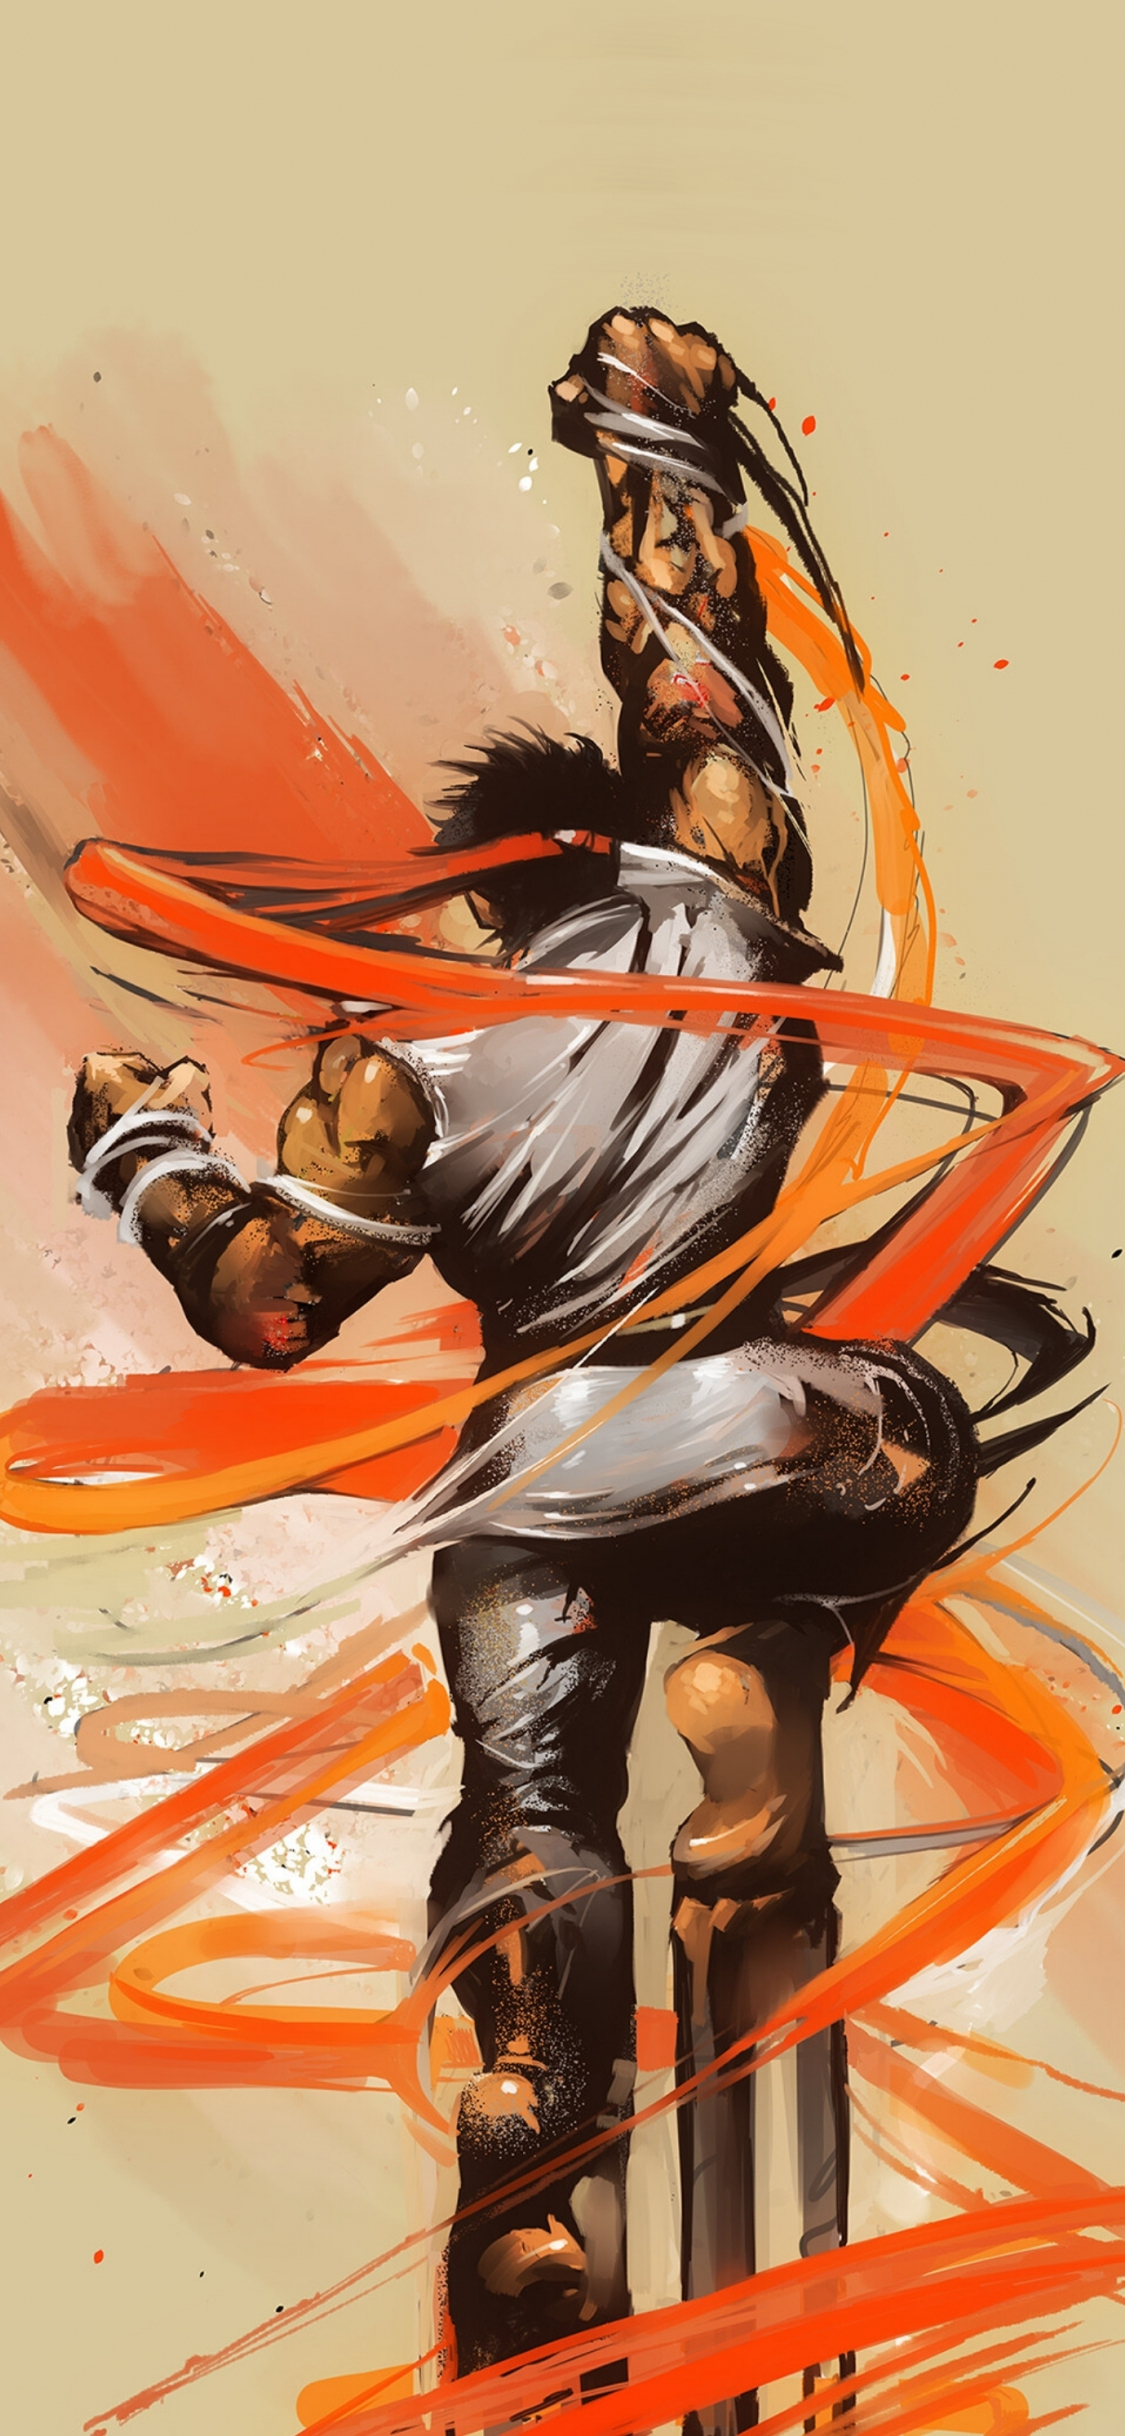 1125x2436 Download ryu, street fighter, video game, art wallpaper, iphone x, hd image, background, 25399